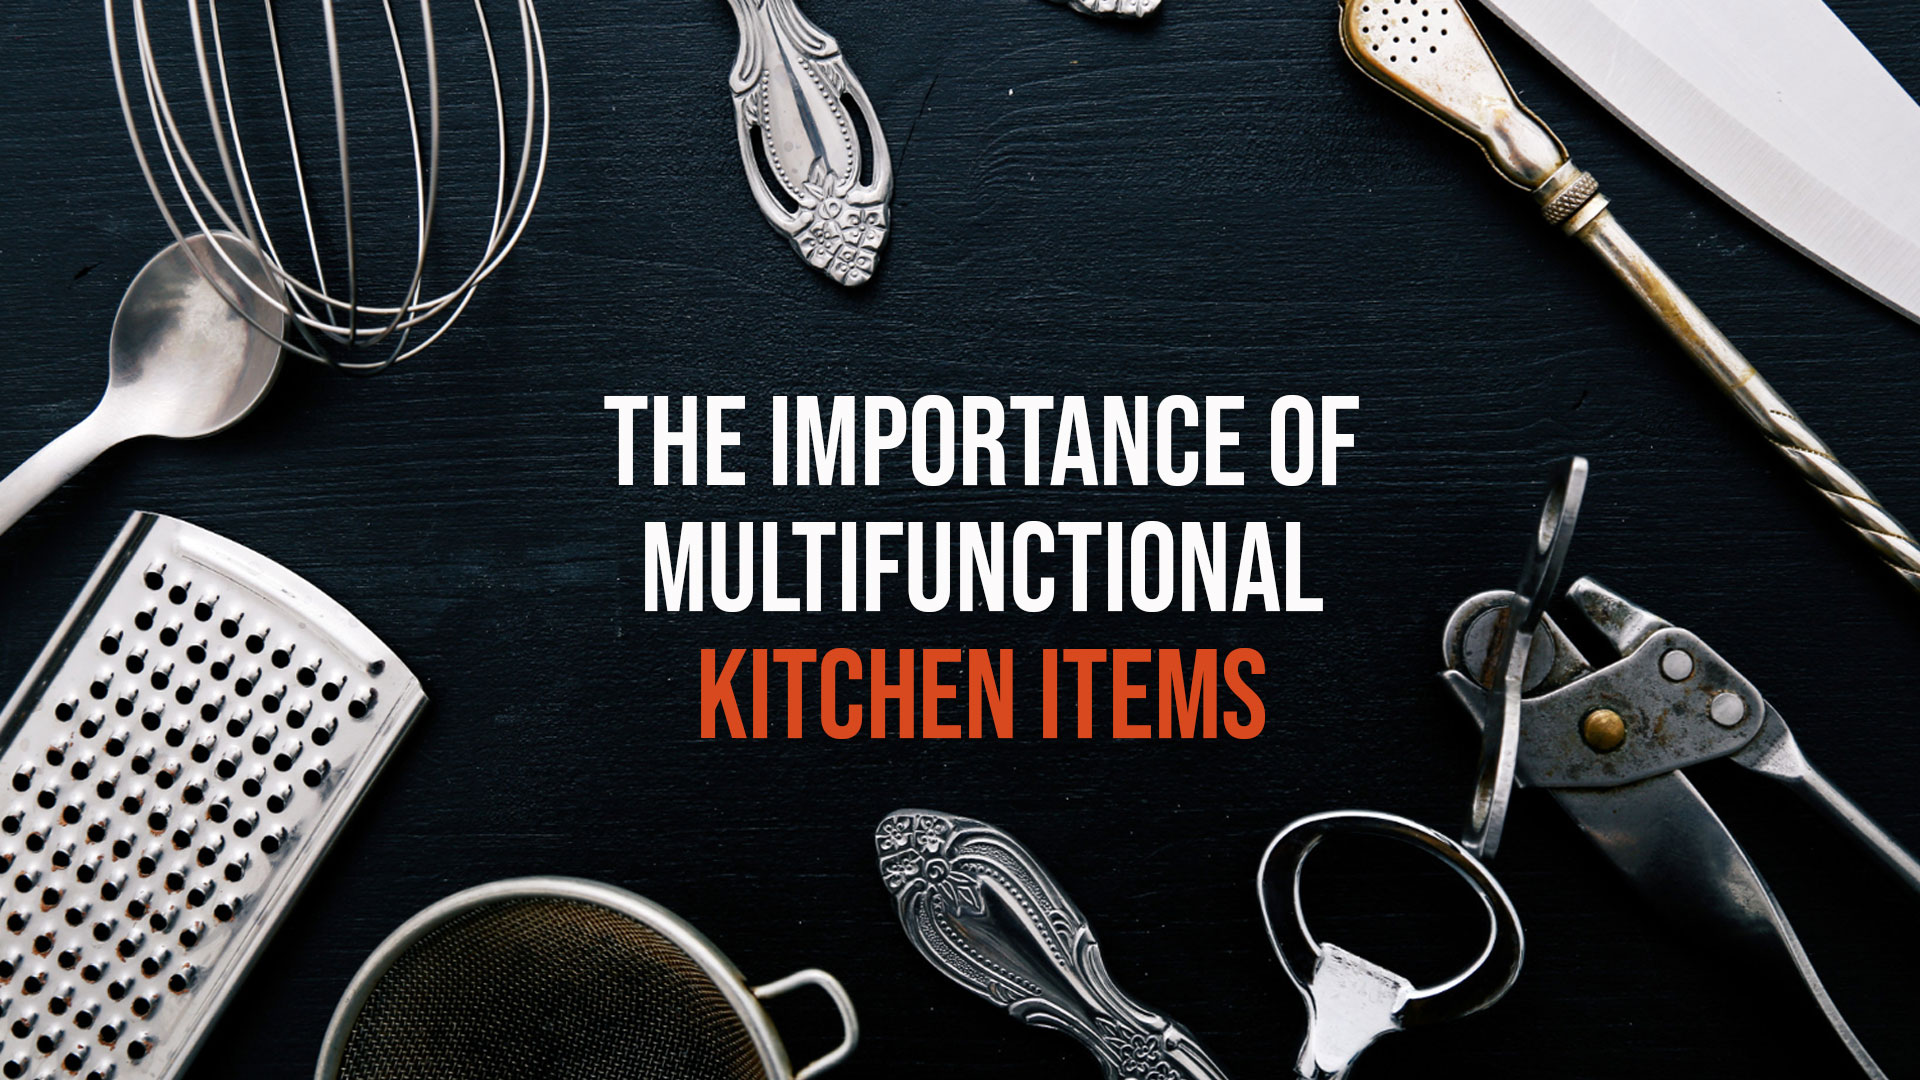 The Importance of Multifunctional Kitchen Items